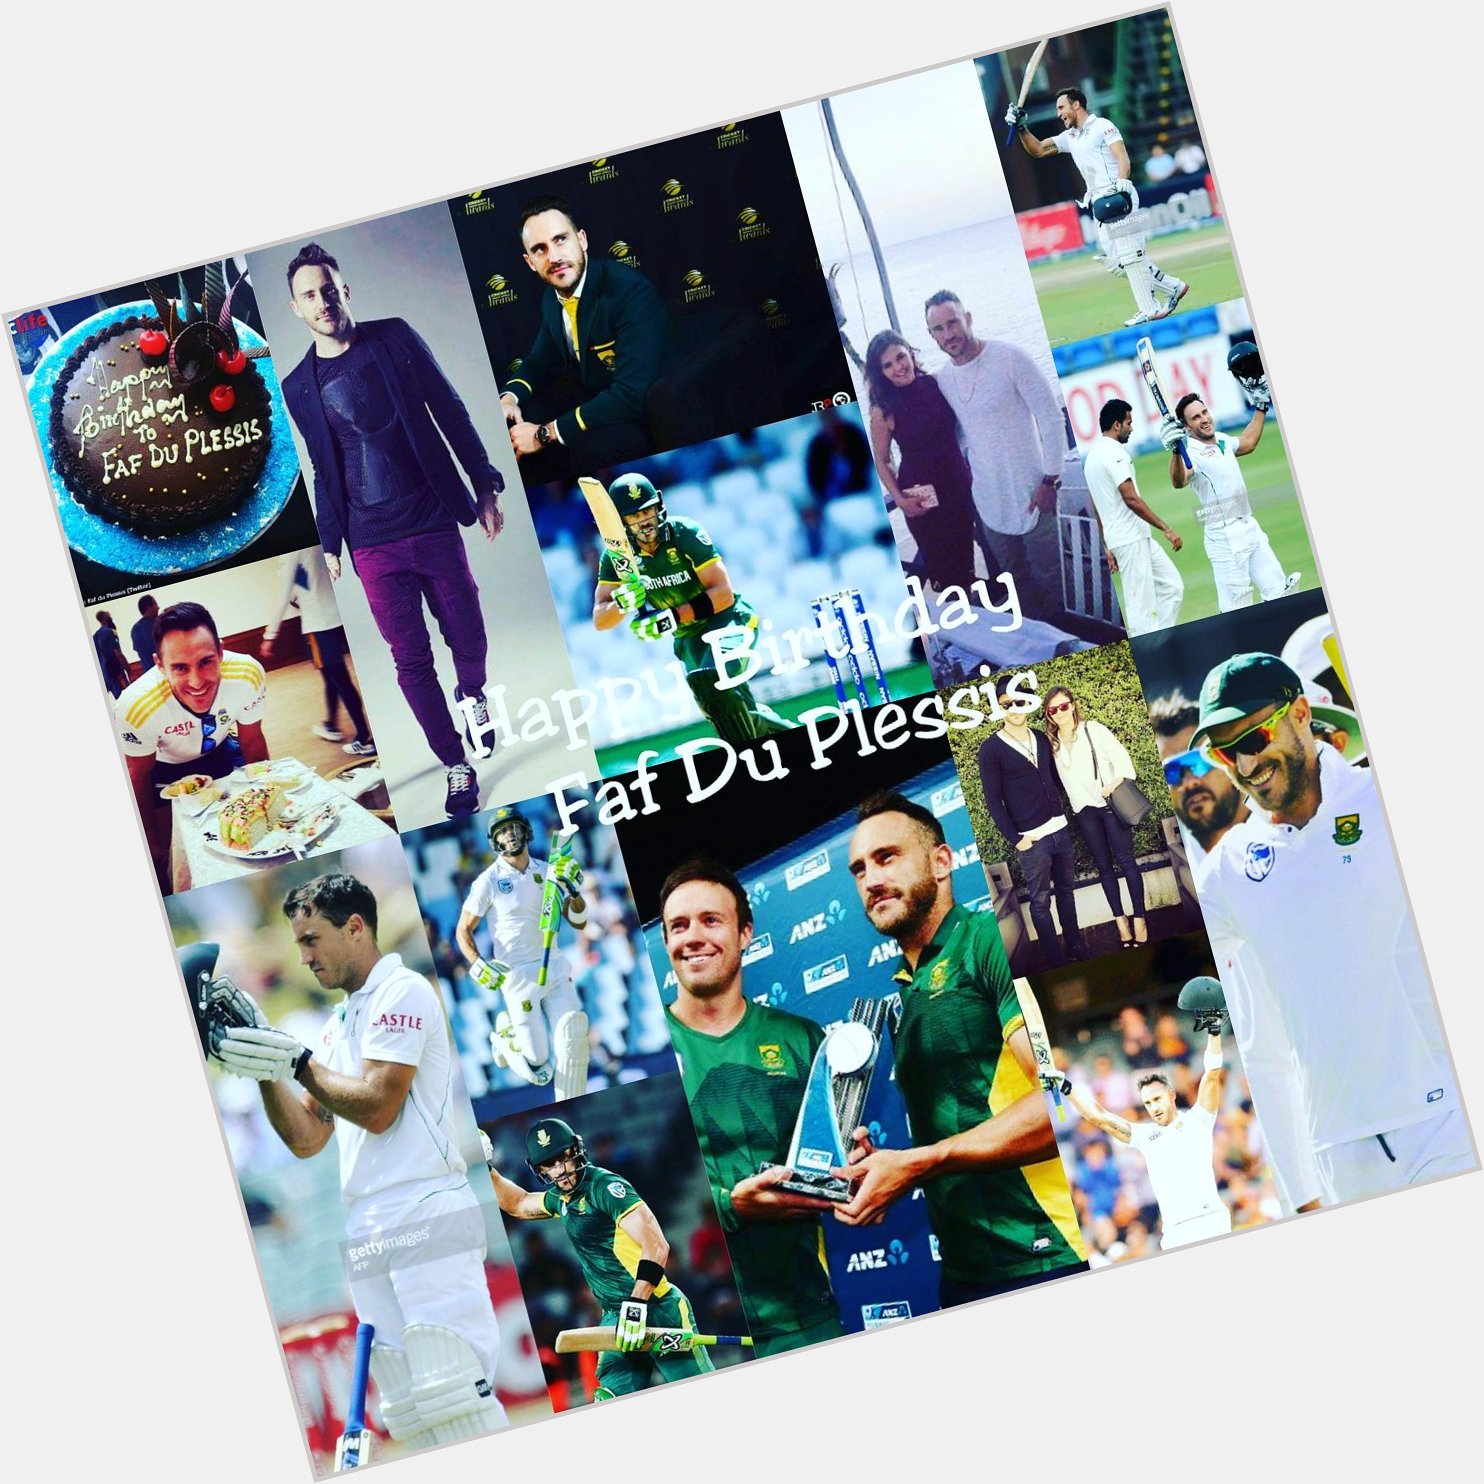 Happy birthday my cricket super hero cool captain south Africa faf du Plessis.   